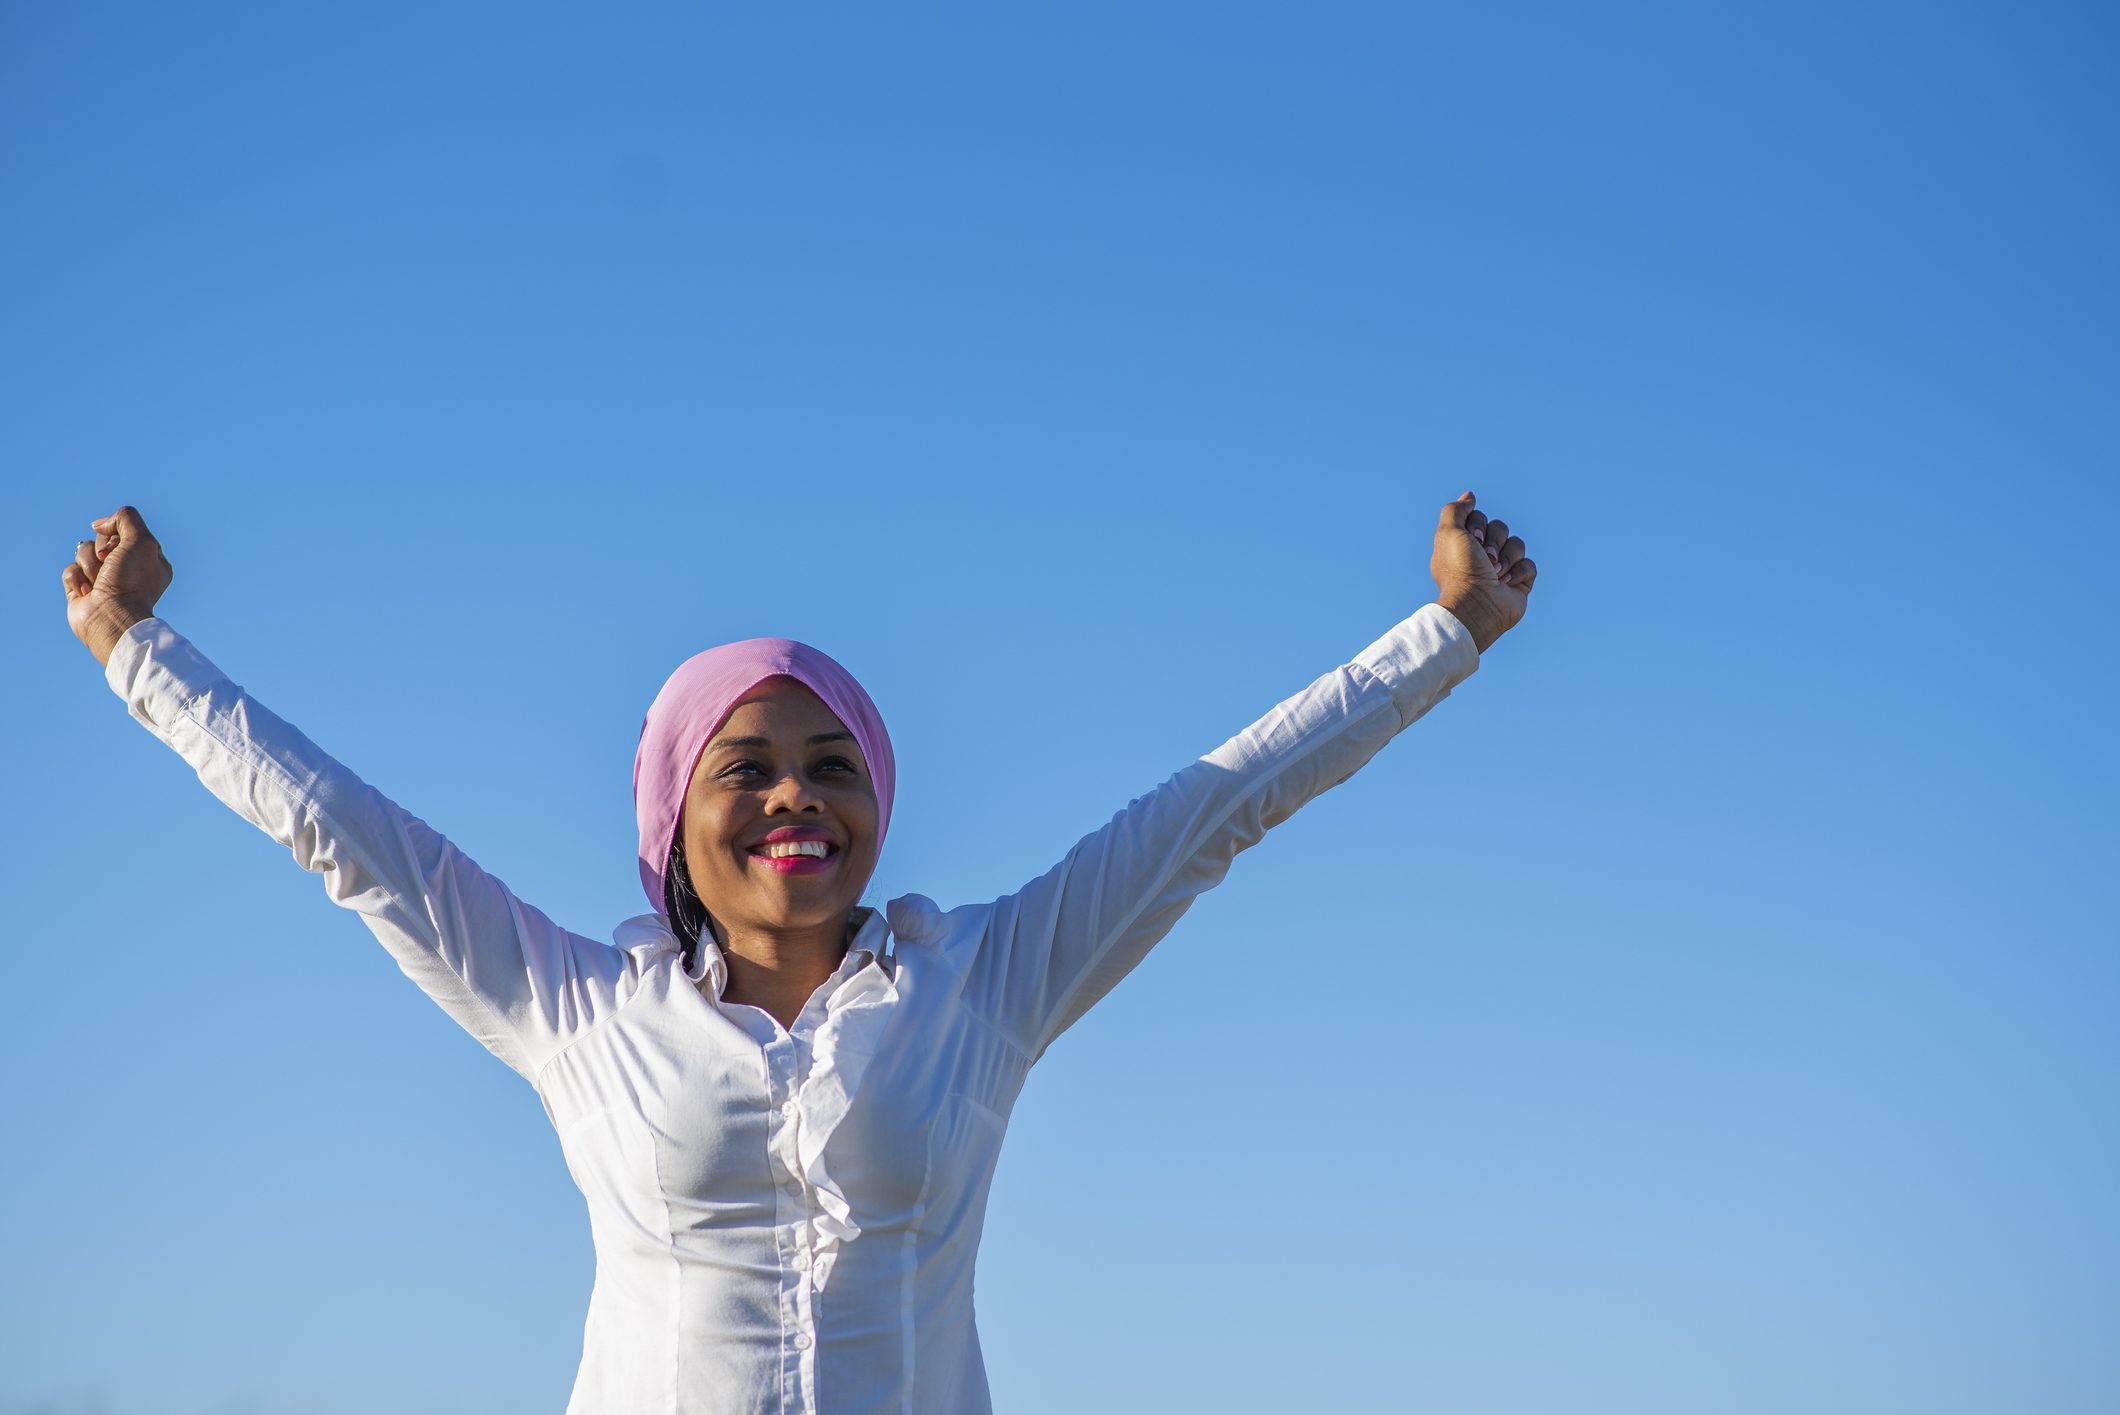 Very smiling African-American woman with a pink headscarf raising her arms